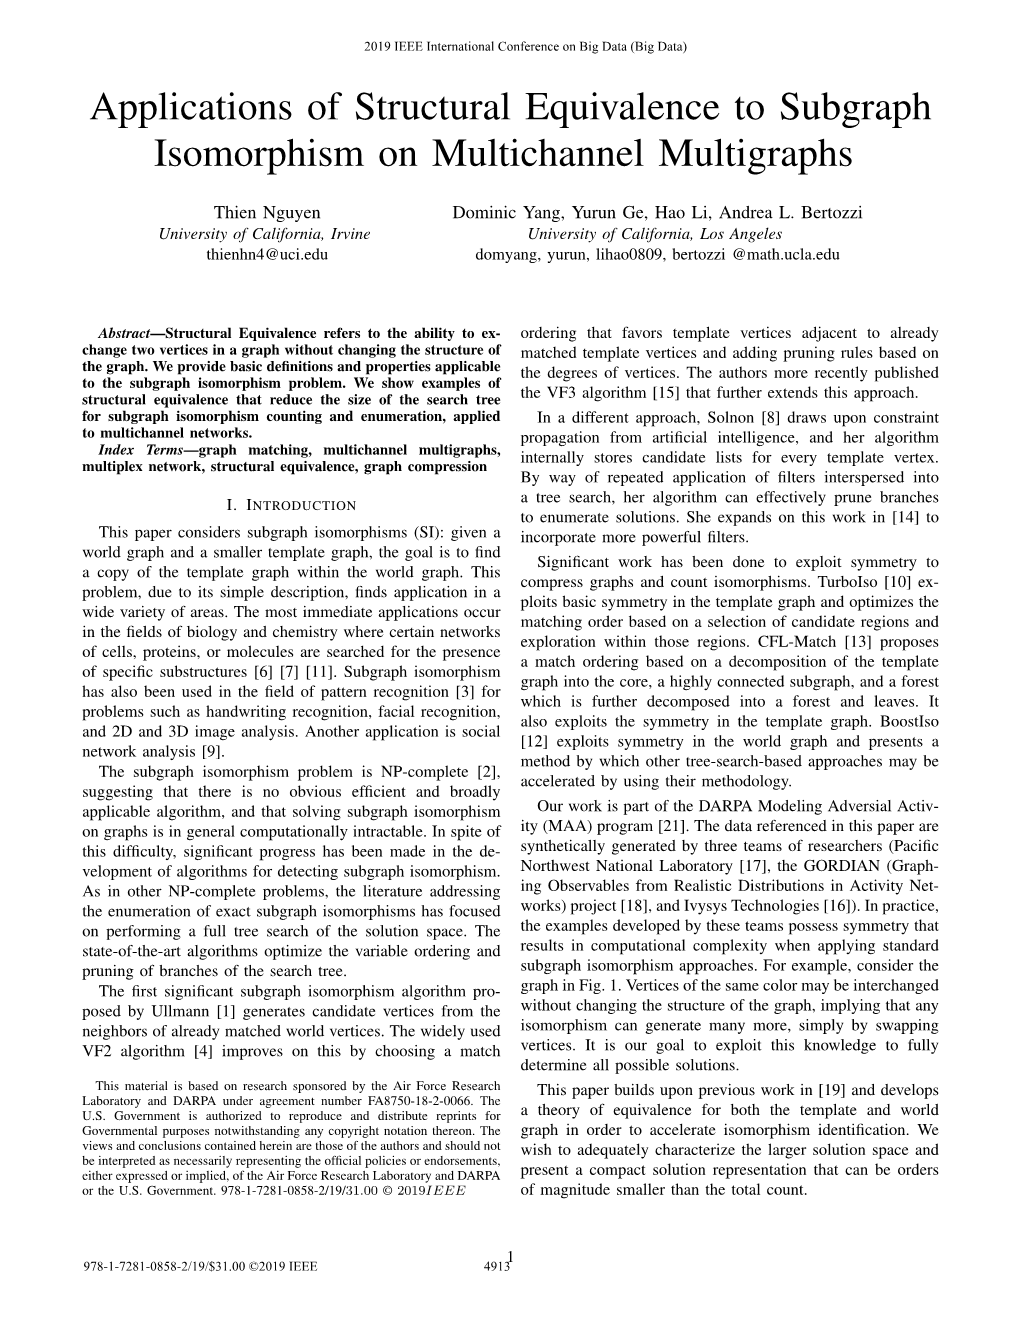 Applications of Structural Equivalence to Subgraph Isomorphism on Multichannel Multigraphs